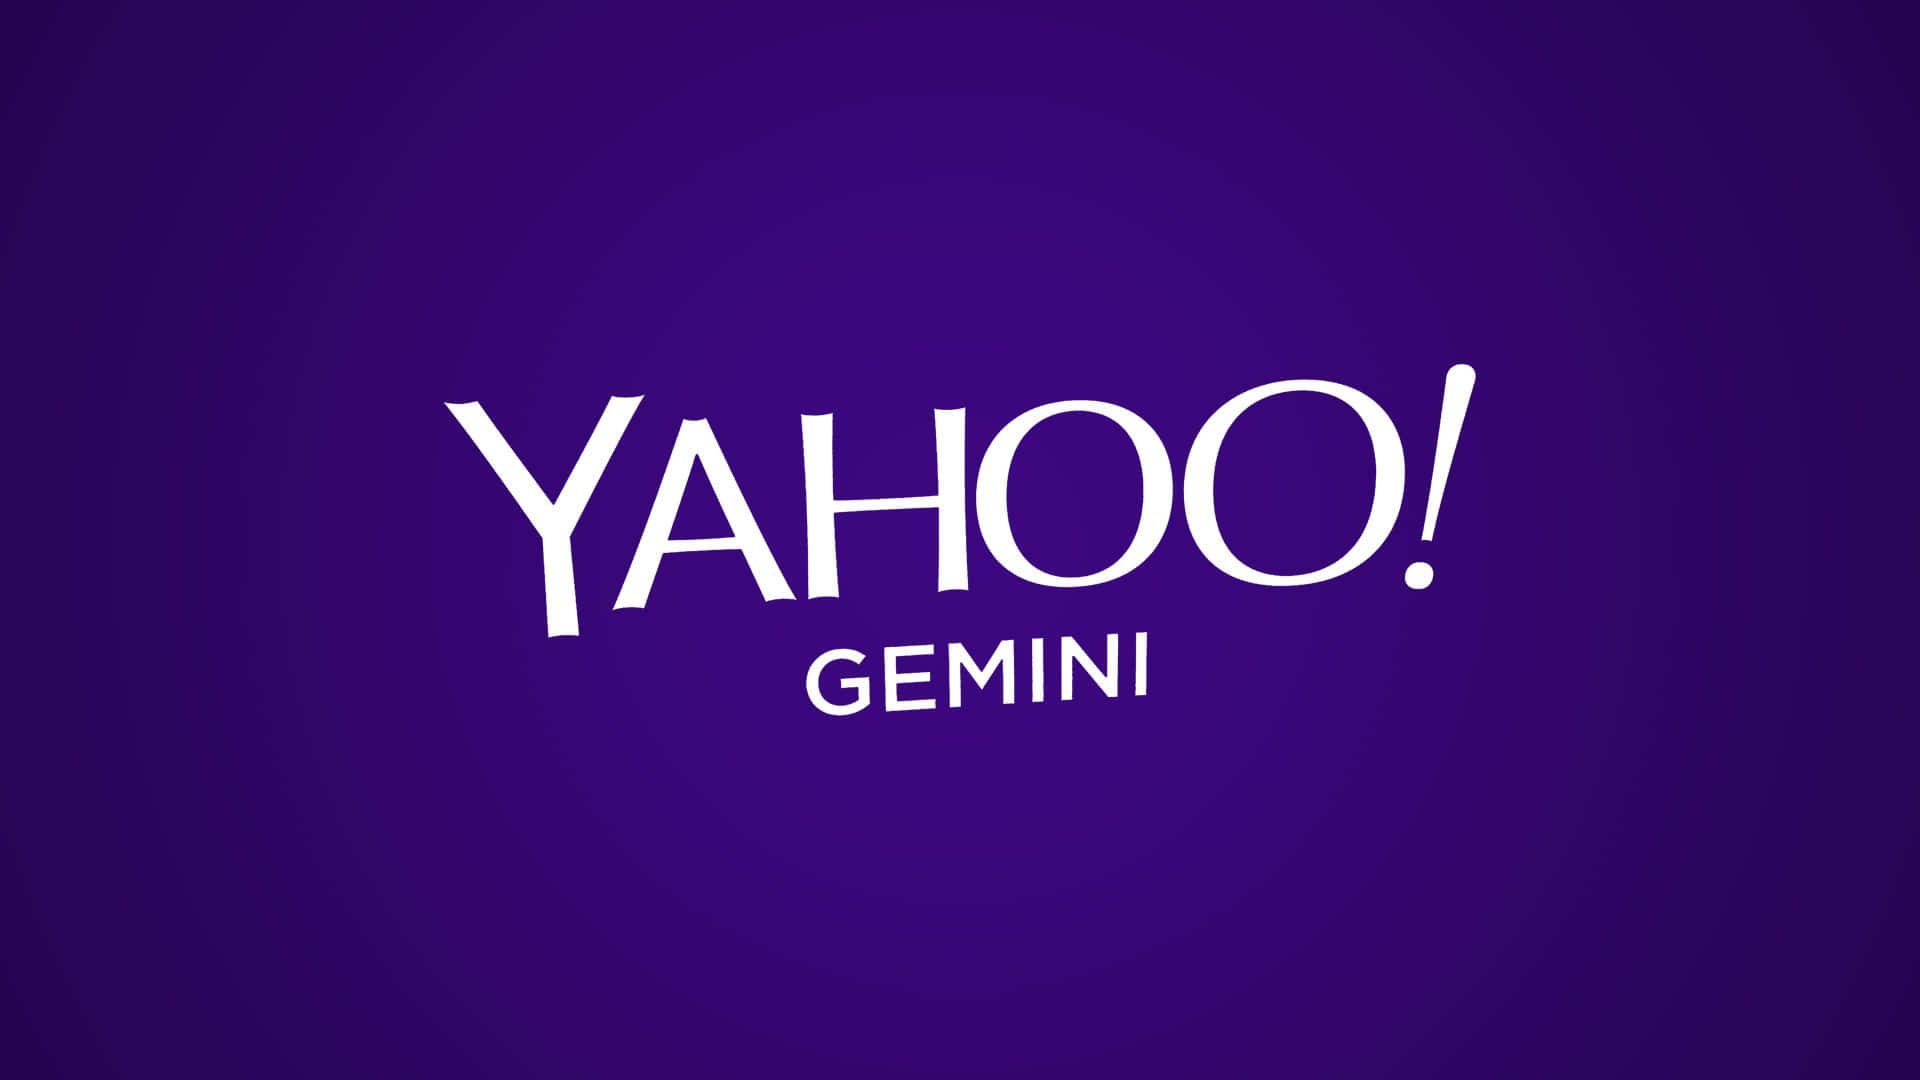 Yahoo Search Leverages Artificial Intelligence to Deliver the Most Comprehensive Search Results